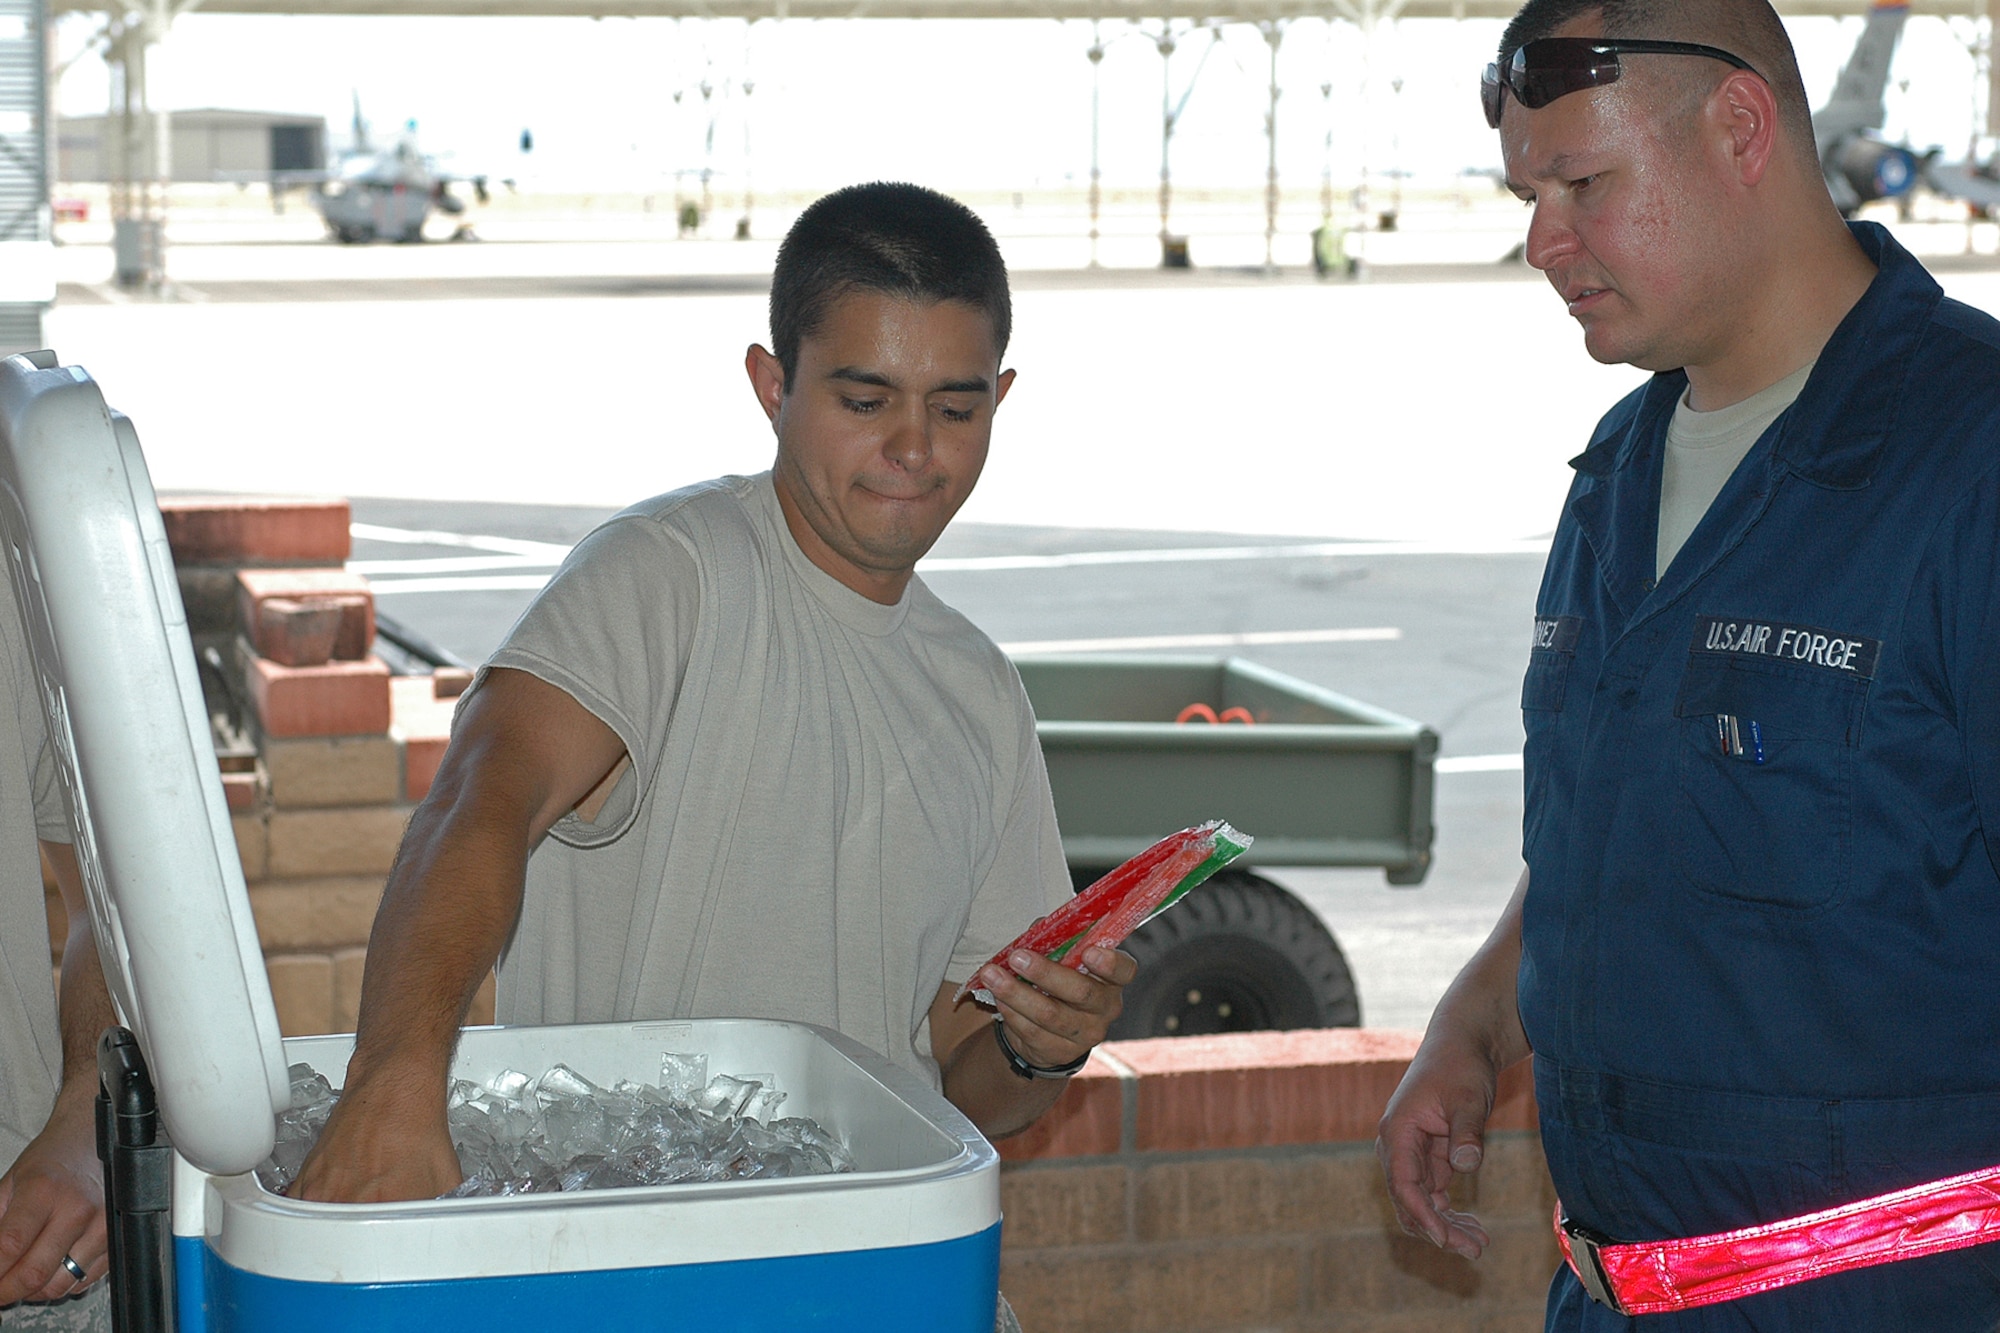 Tech. Sgt. Isreal Montoya, treasurer, Junior Enlisted Council, gathers frozen popsicles to give to Guardsmen working in the 100 degree Tucson heat and boost moral July 8. (U.S. Air Force photo/Staff Sgt. Jordan Jones)
